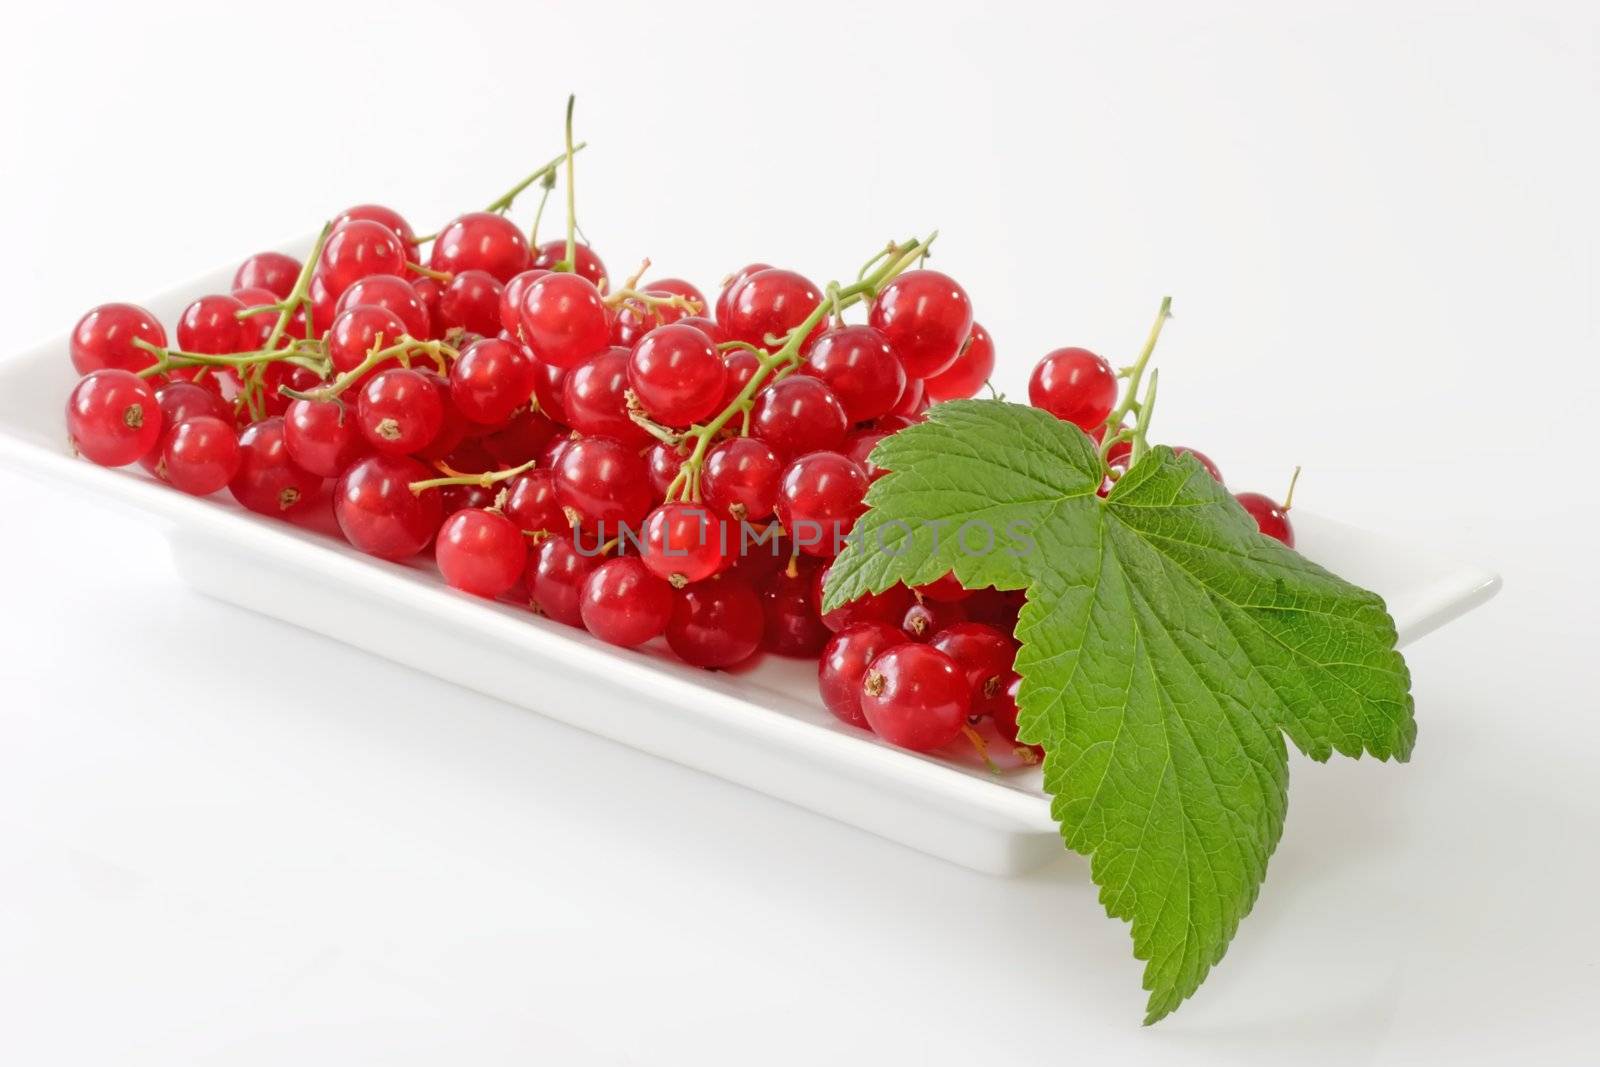 Red currants with leaf on a white plate